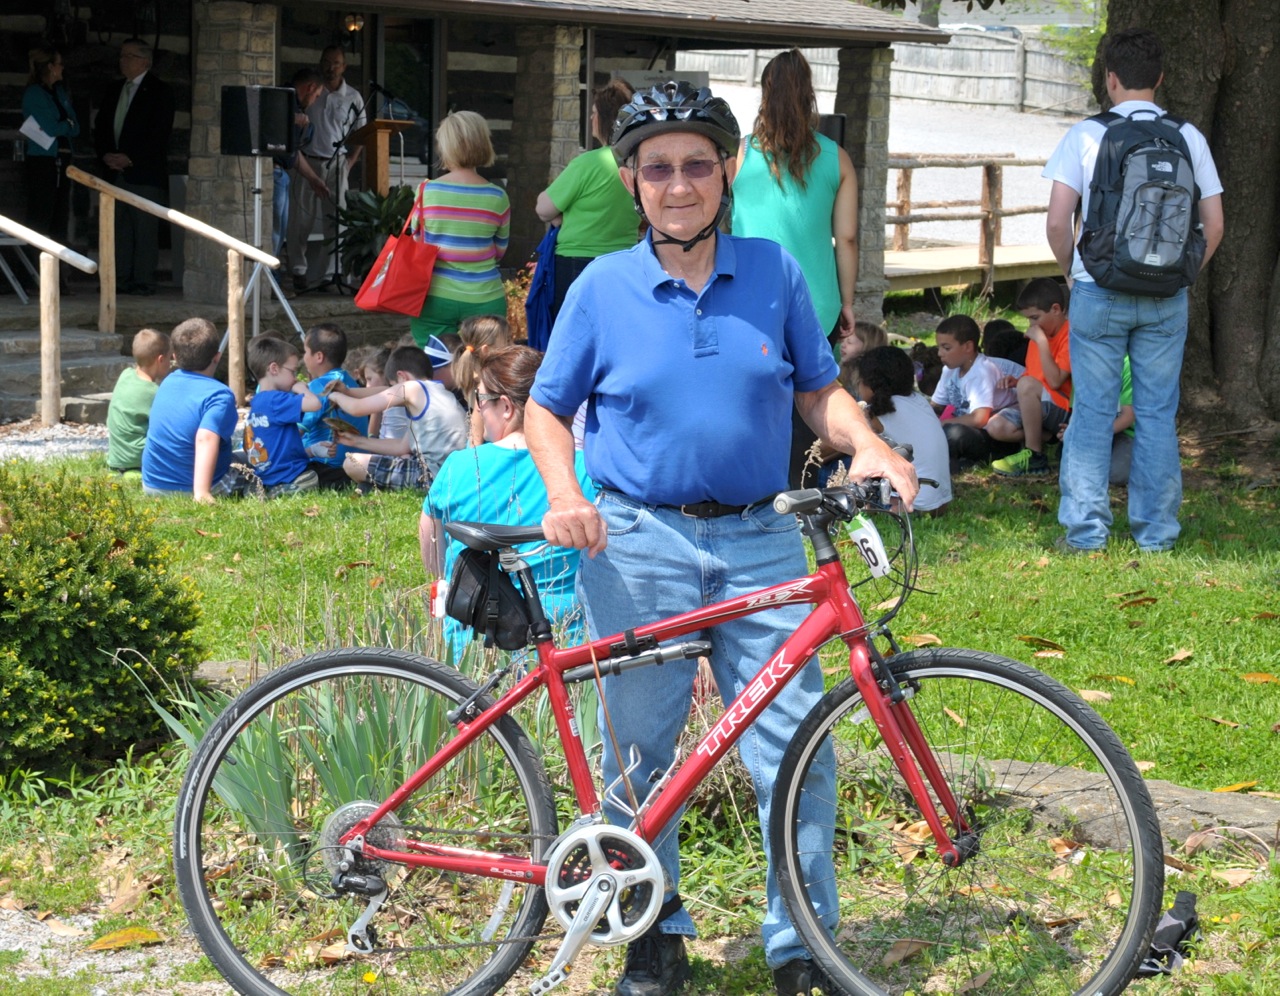 Paul Osborne, CU trustee and head of grounds and  landscape development, rode his Trek to the Earth Day  celebration on April 22. He is an avid biker and among the  leaders of the Campbellsville-Taylor County Trail Town  development. (CU Photo by Linda Waggener)